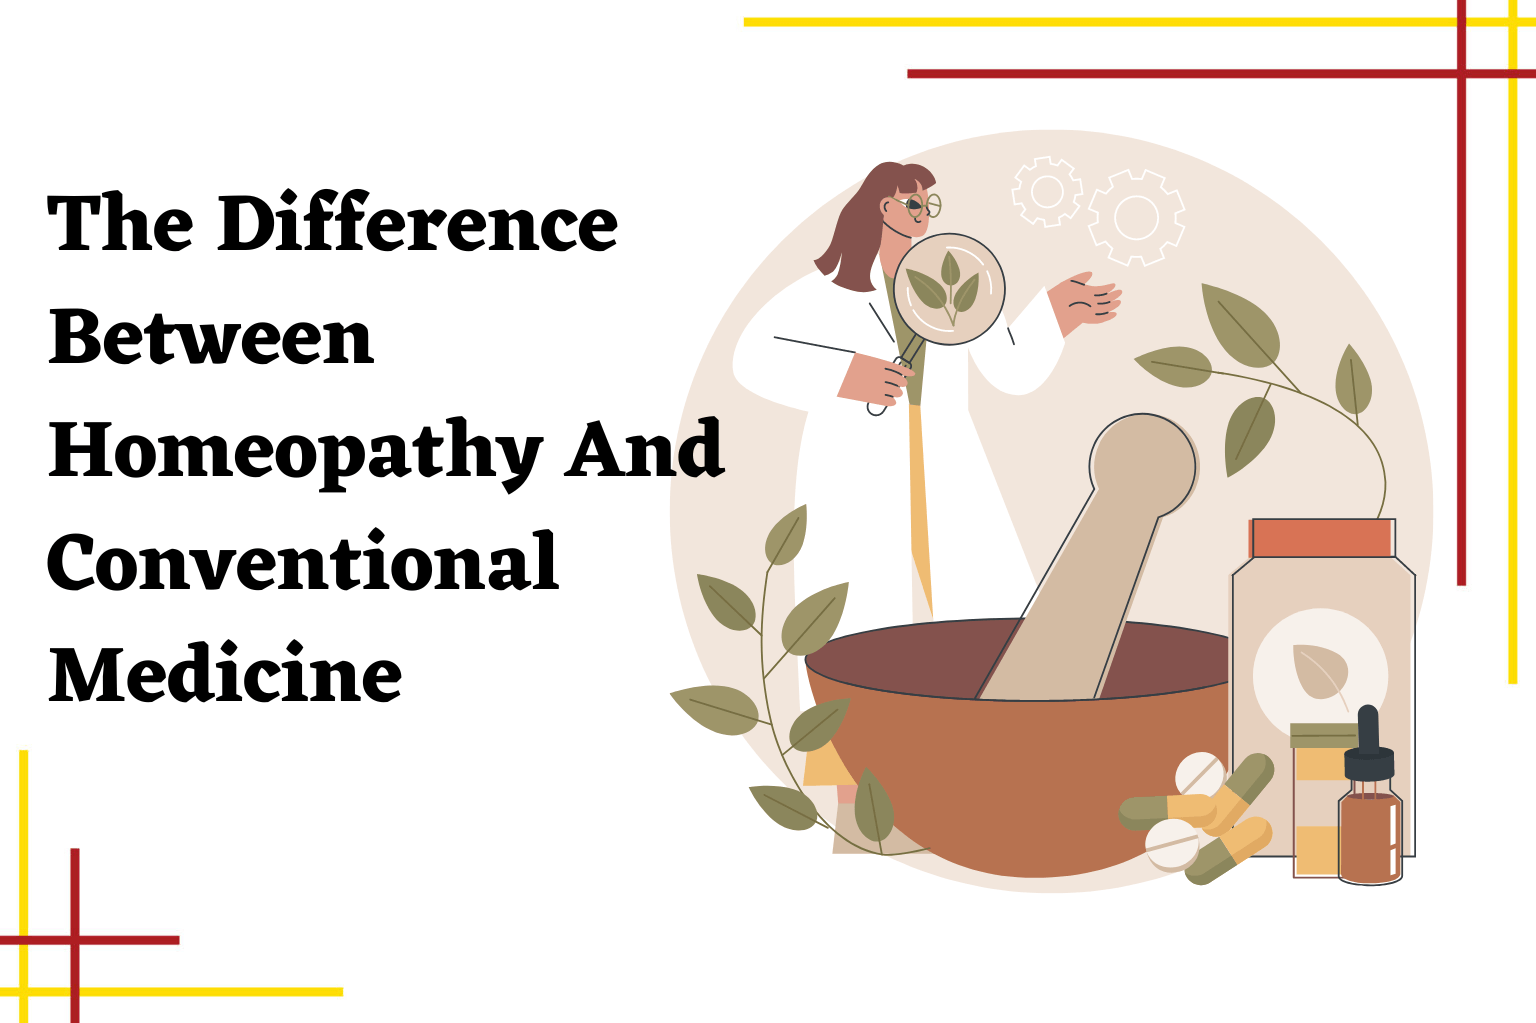 Understanding The Difference Between Homeopathy And Conventional Medicine